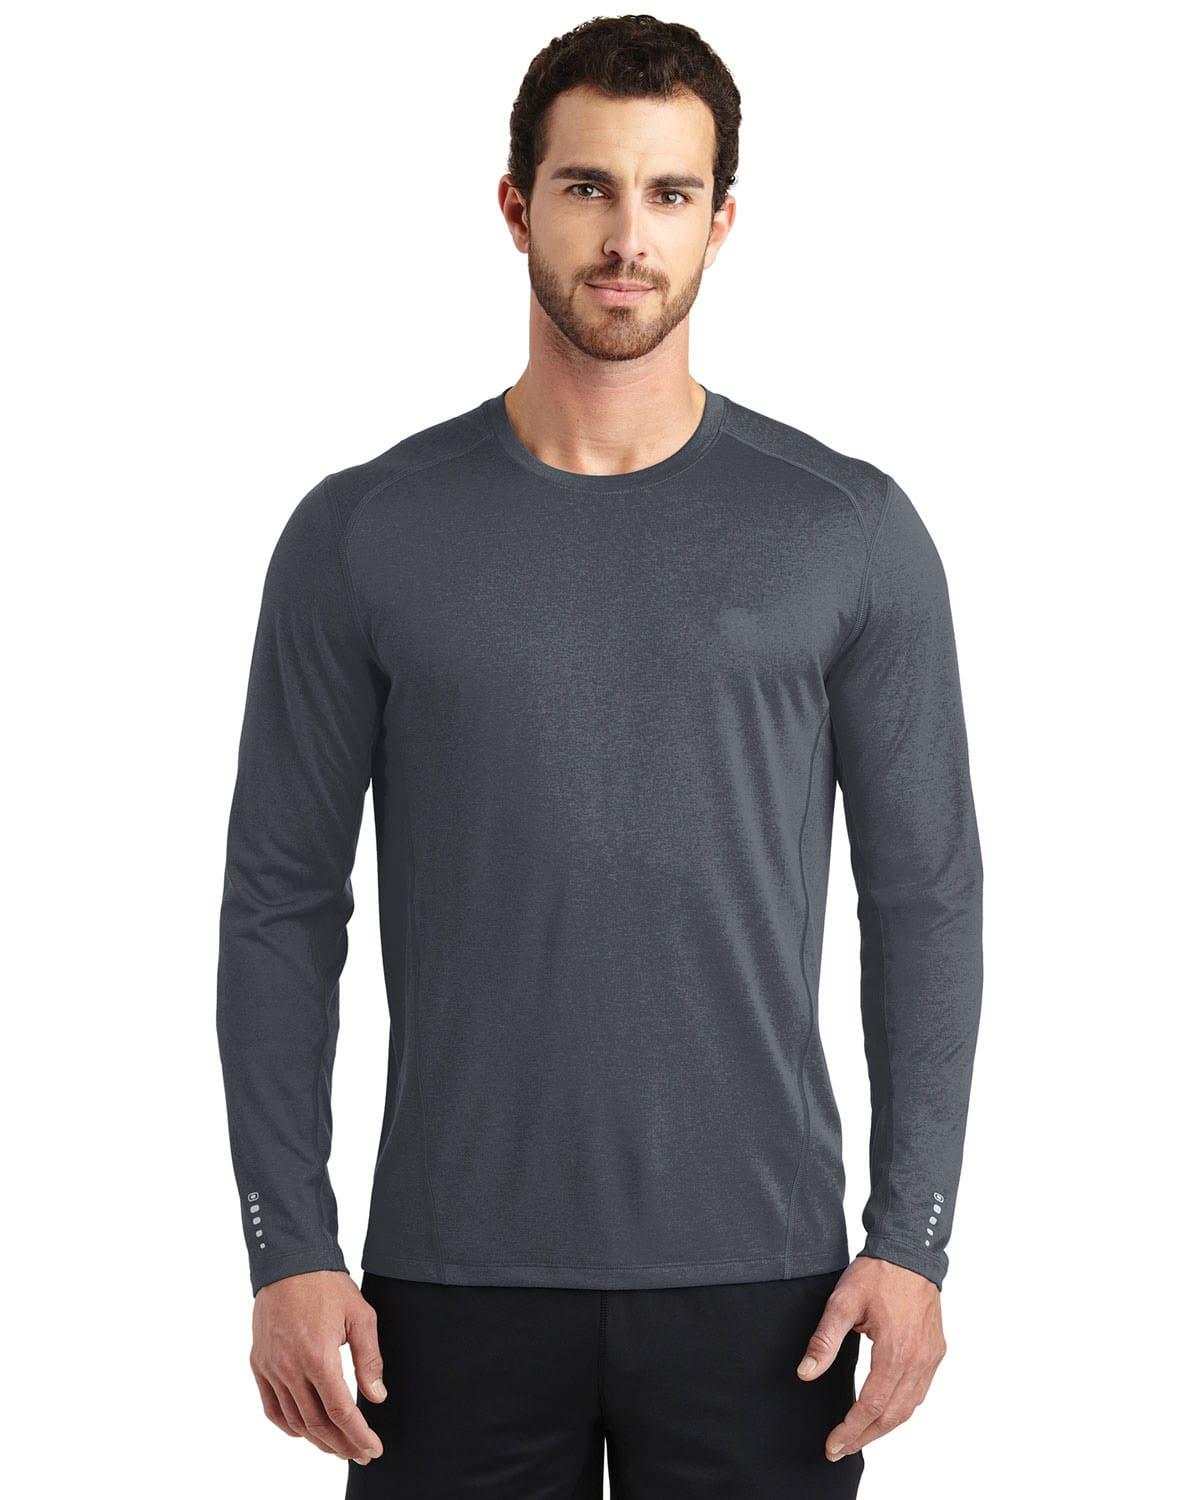 Size Chart for Hanes 482L Mens Adult Cool DRI Long-Sleeve Performance T ...